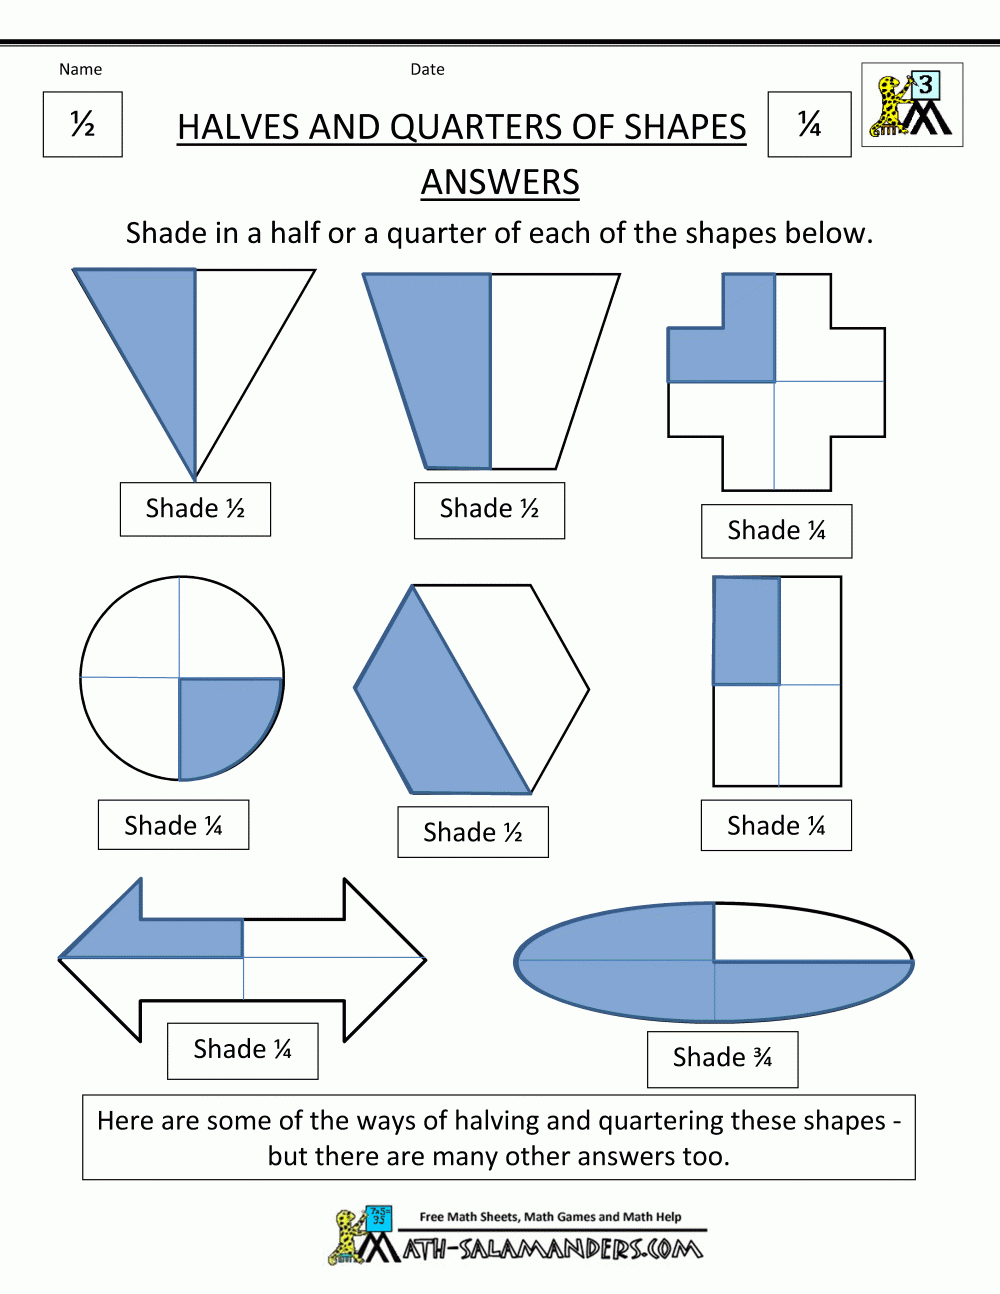 Halves And Quarters Of Shapes Answers 3rd Grade Math Worksheets Shapes Preschool Free Fraction Worksheets